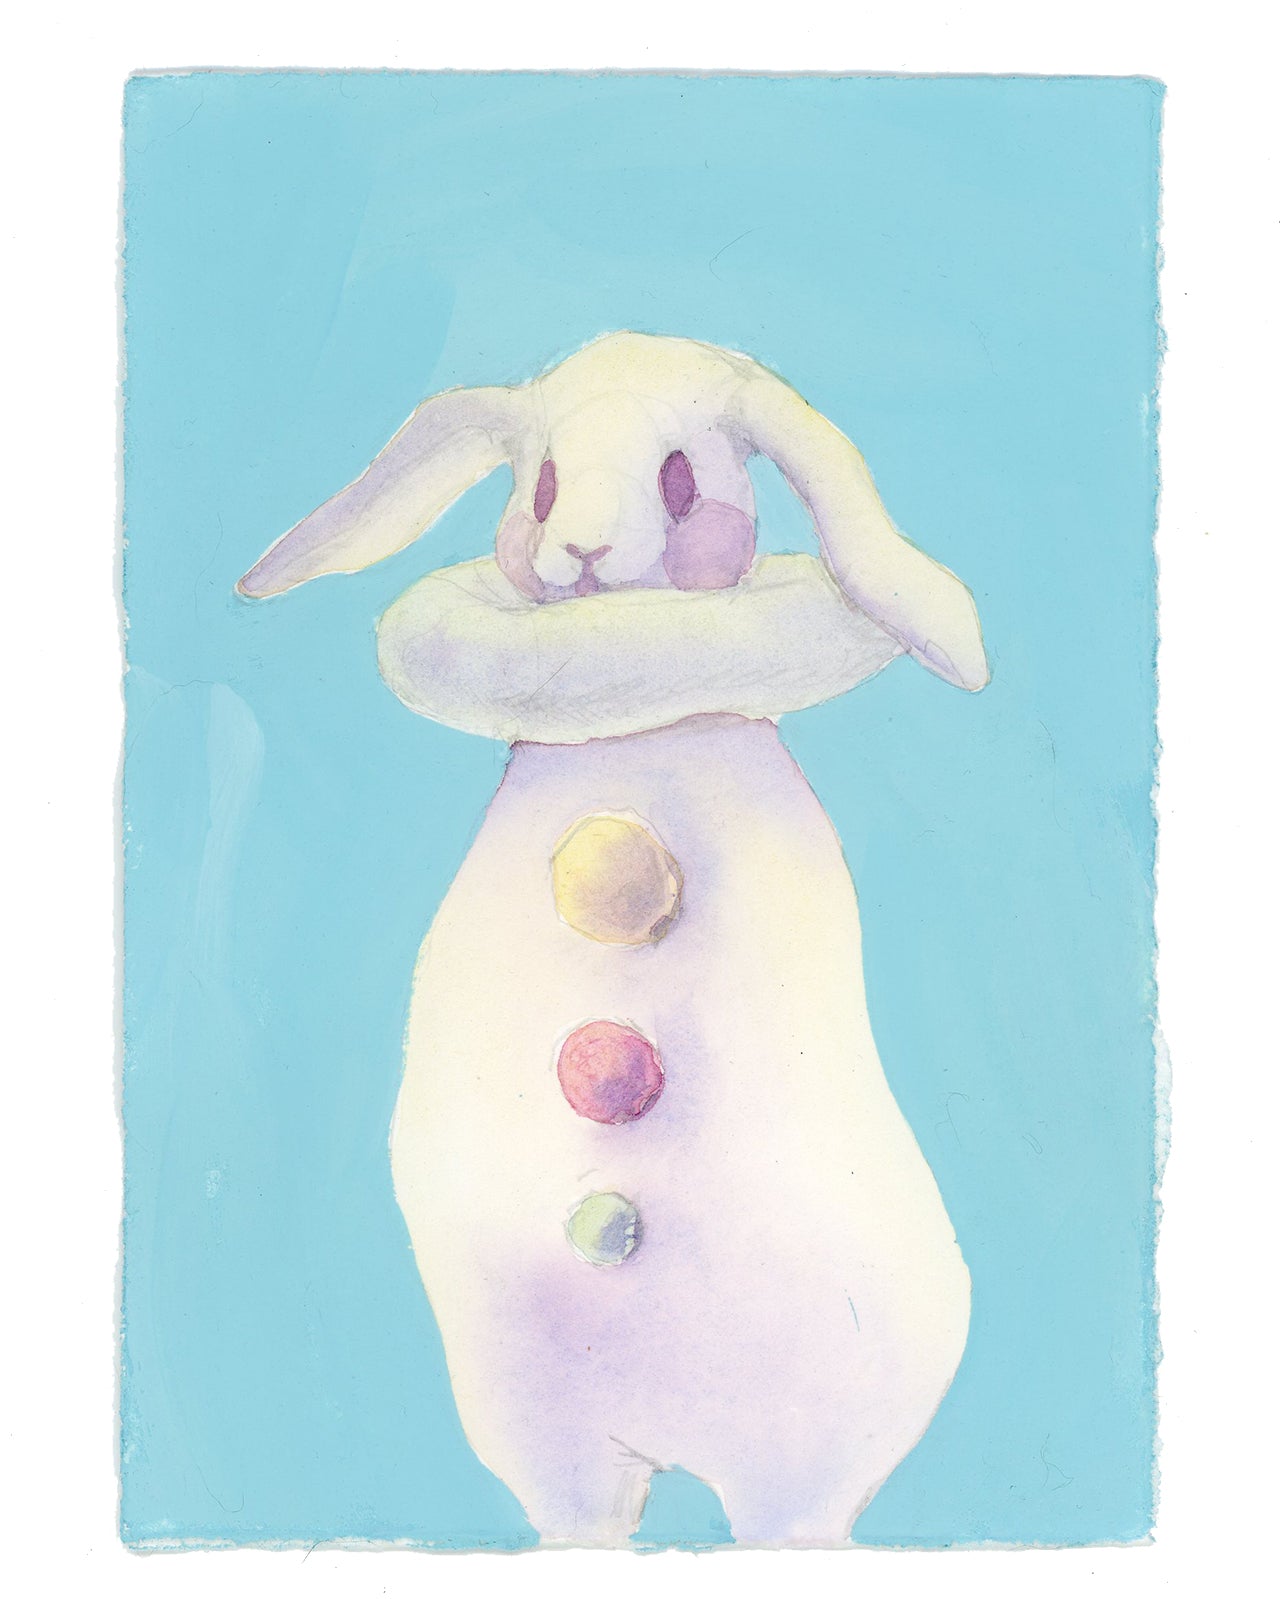 Watercolor #11: "Bunny Pierrot #8"  [5 x 7 inches] Watercolor and Gouache on BFK Rives Paper]